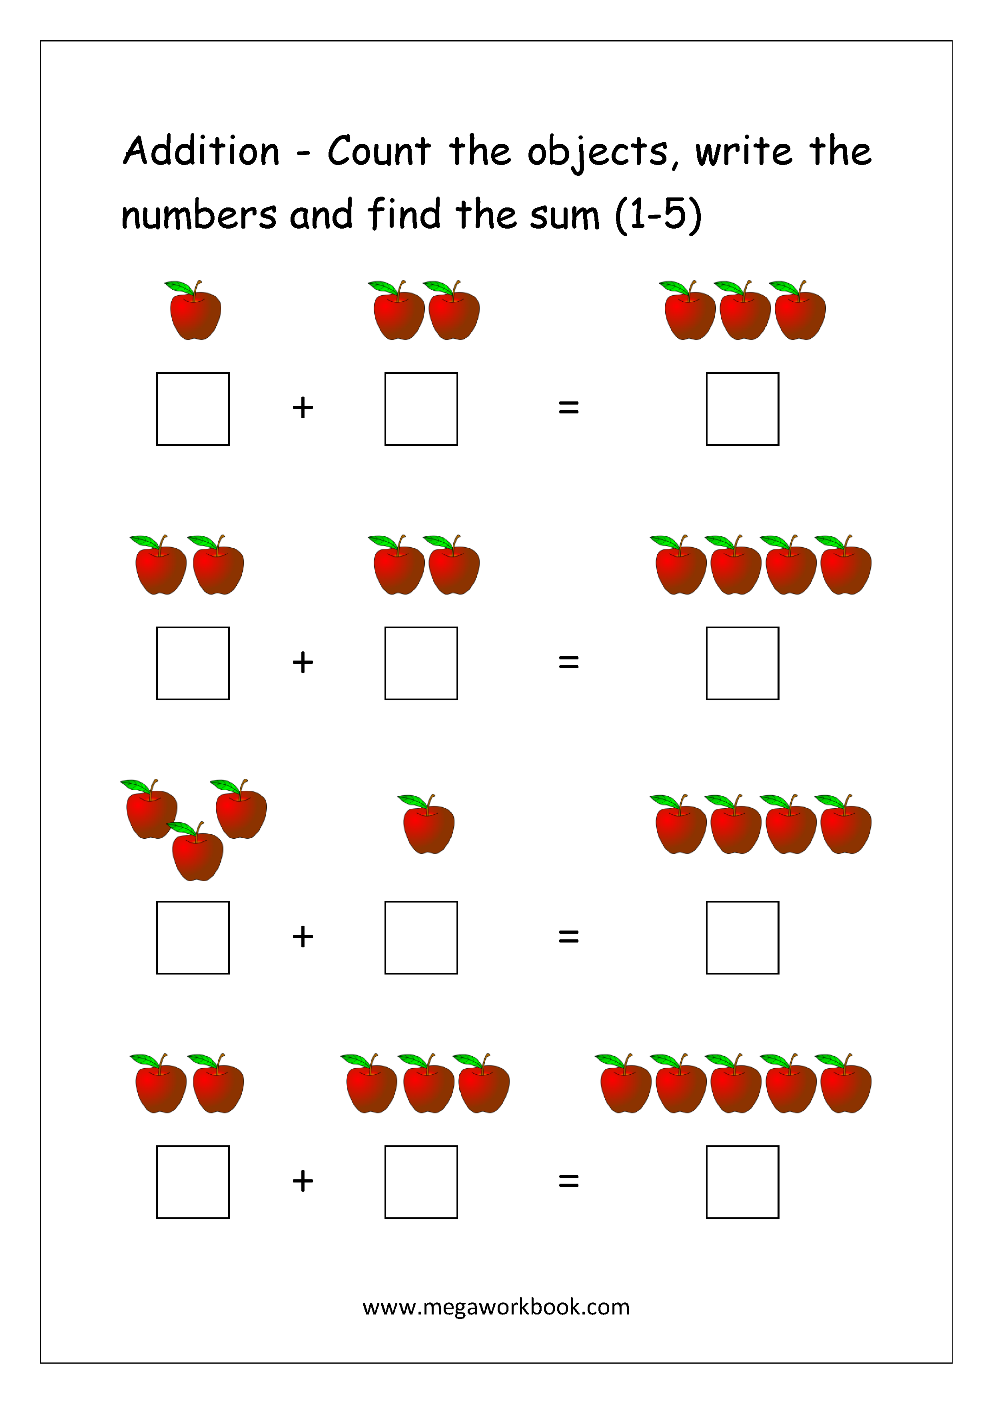 free printable number addition worksheets 1 10 for kindergarten and grade 1 addition on number line addition with pictures objects megaworkbook